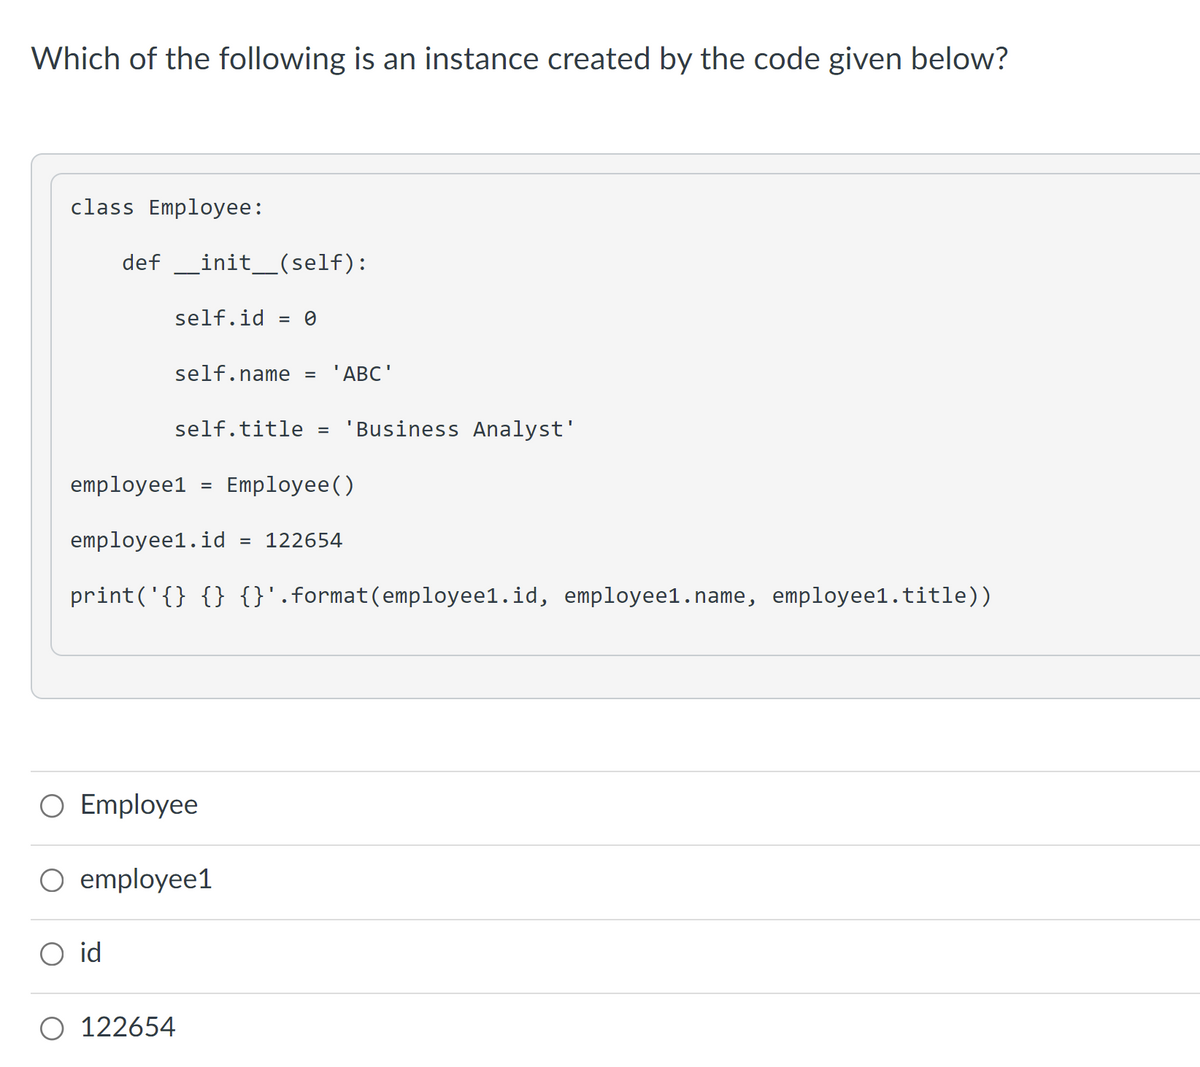 Which of the following is an instance created by the code given below?
class Employee:
def _init_(self):
self.id
= 0
self.name =
'ABC'
self.title
'Business Analyst'
employee1
Employee()
employee1.id
= 122654
print('{} {} {}'.format(employee1.id, employee1.name, employee1.title))
O Employee
O employee1
O id
O 122654
